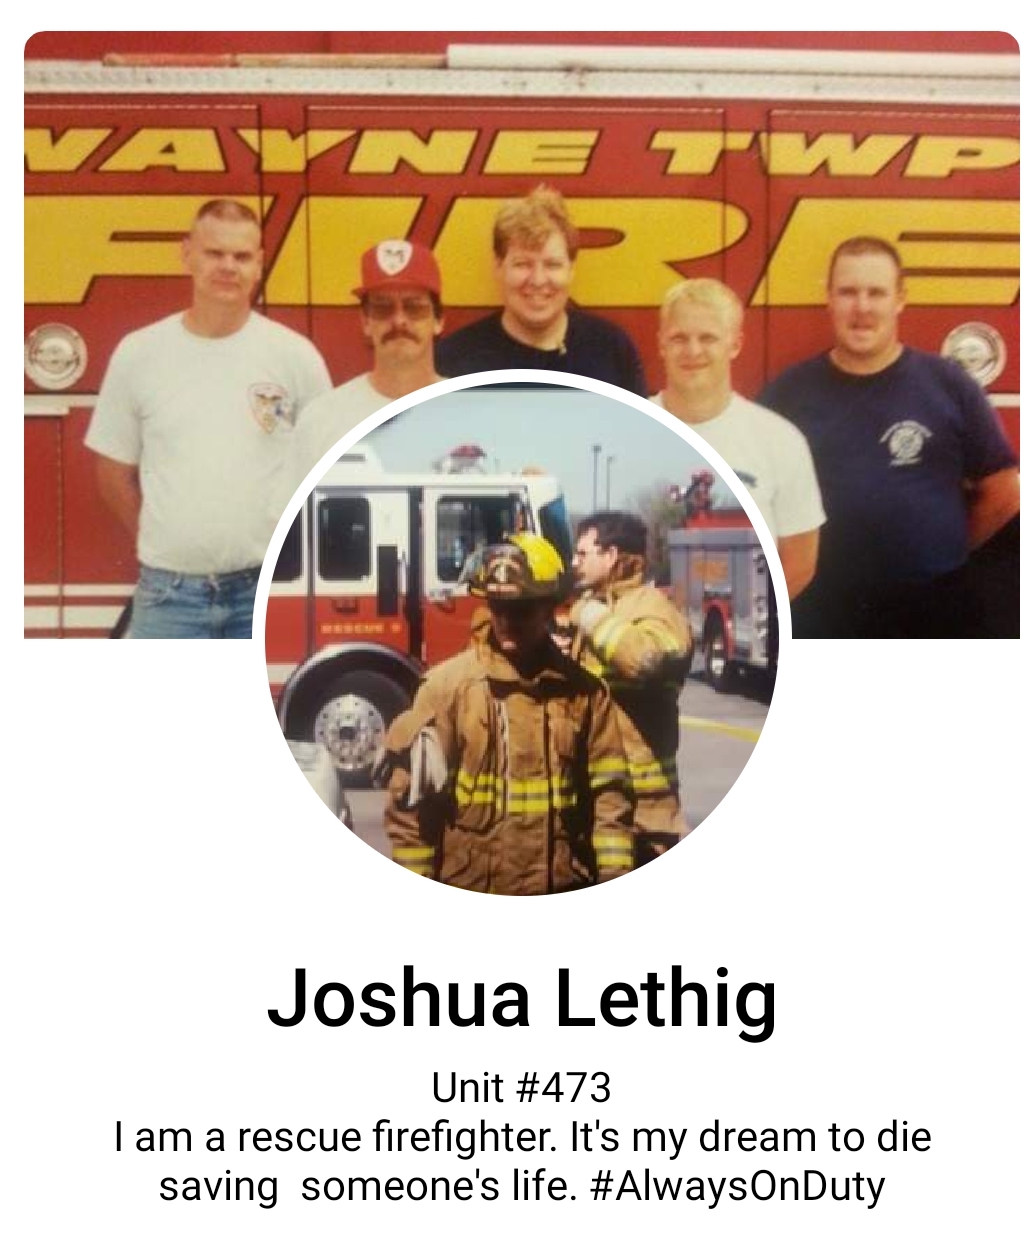 Joshua Lethig Unit I am a rescue firefighter. It's my dream to die saving someone's life. On Duty